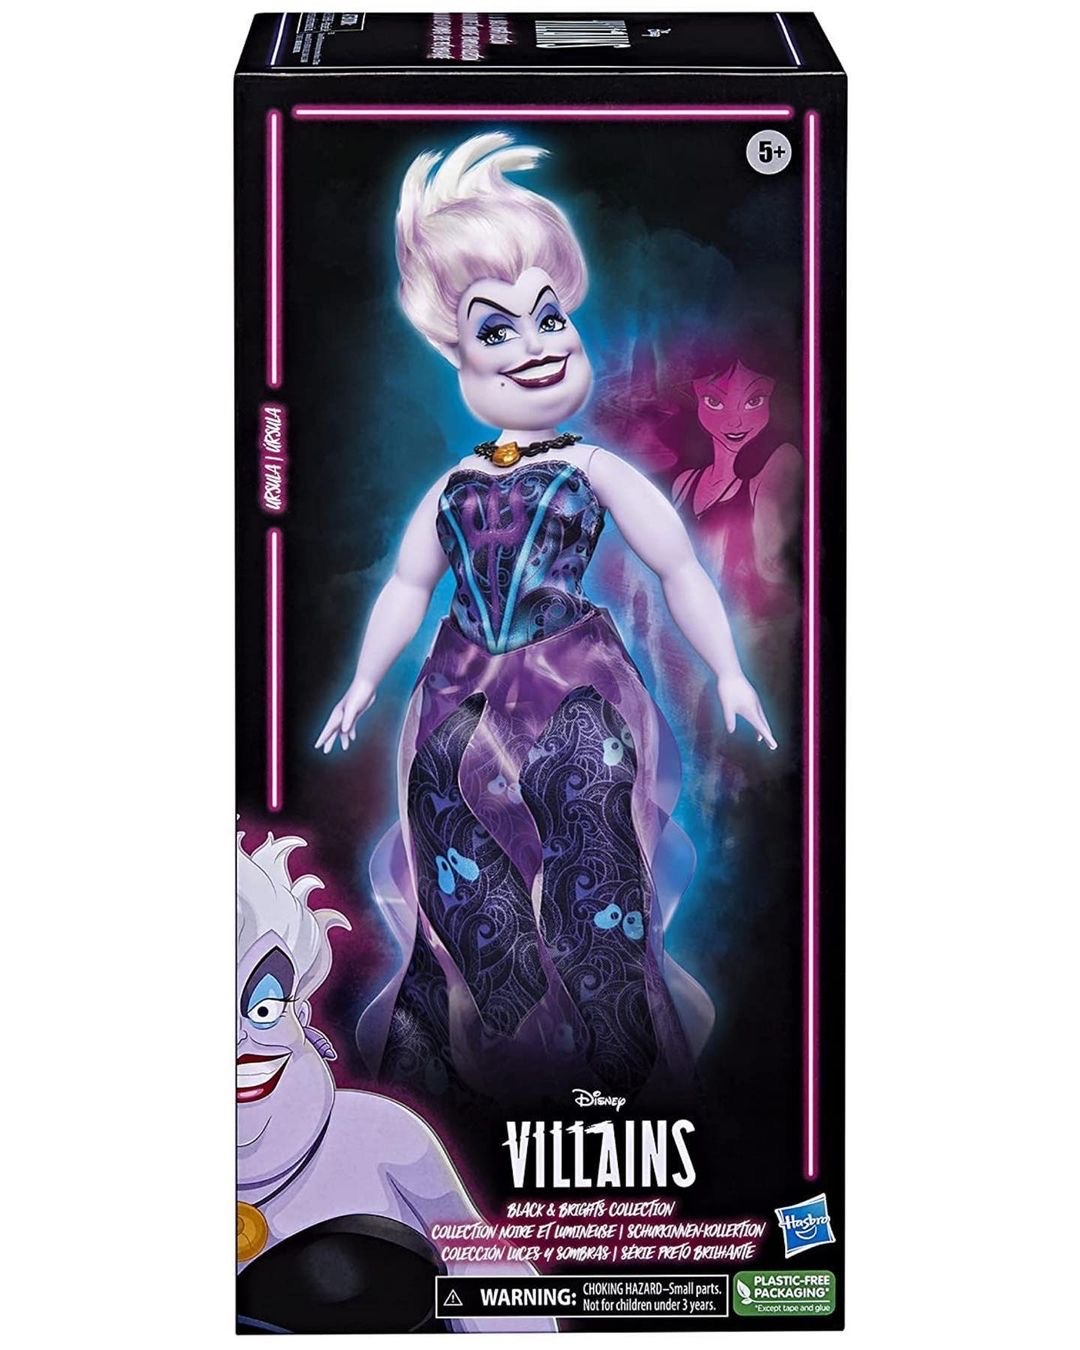 Exclusive Disney Villains Toy for Kids 5 Years Old and Up Fashion Doll 4 Pack Disney Villains Black and Brights Collection 